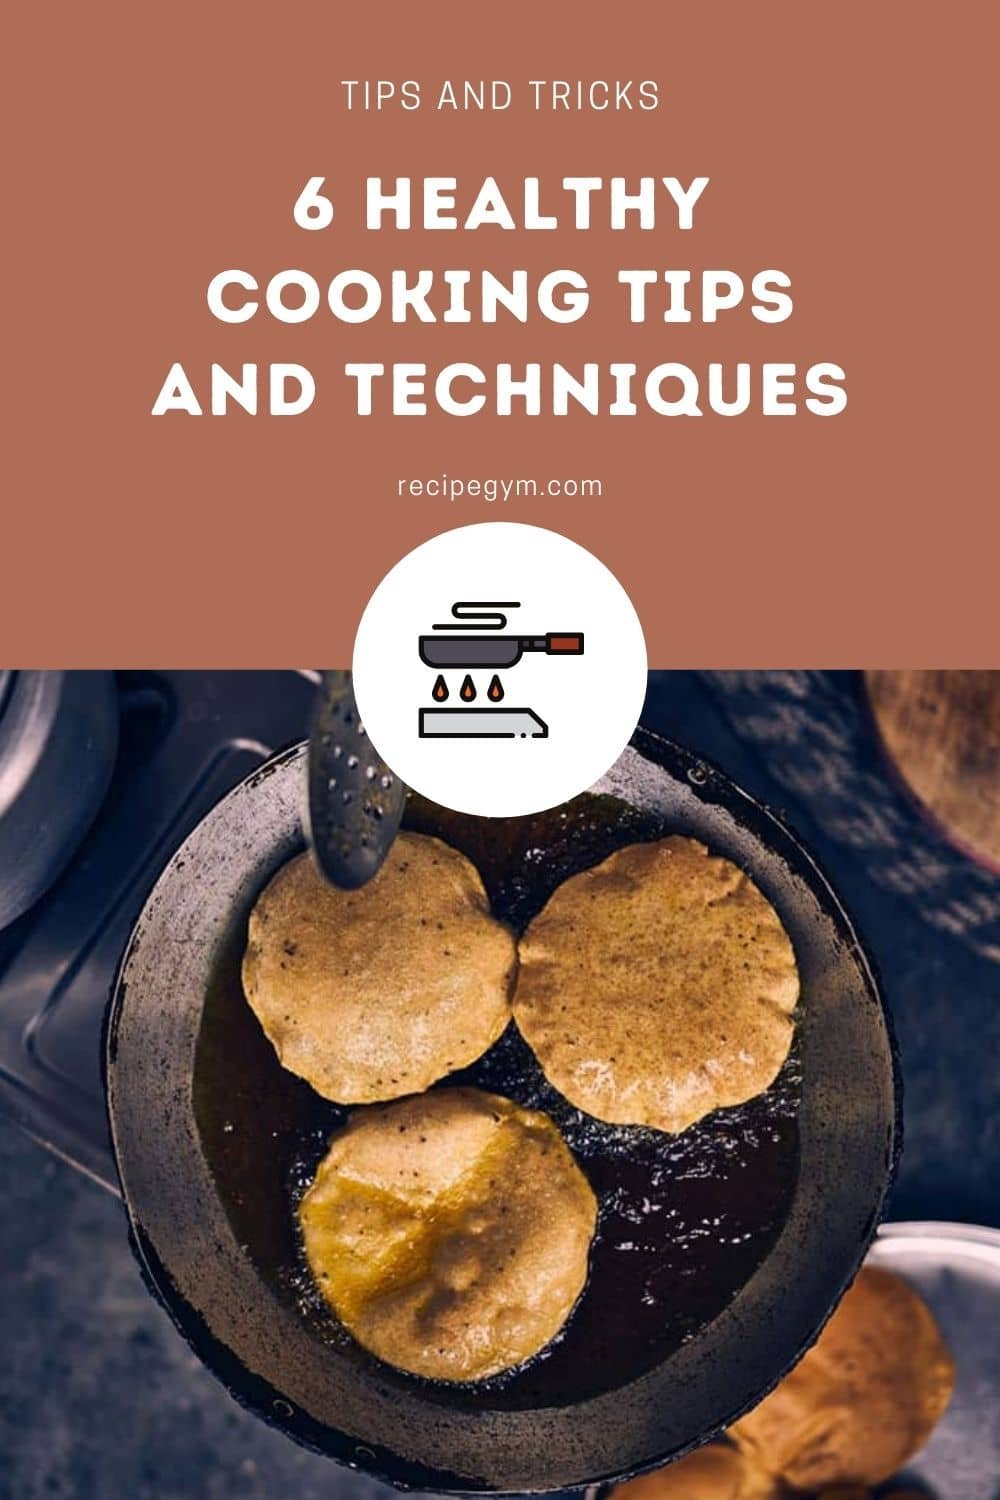 Healthy Cooking Tips and Techniques